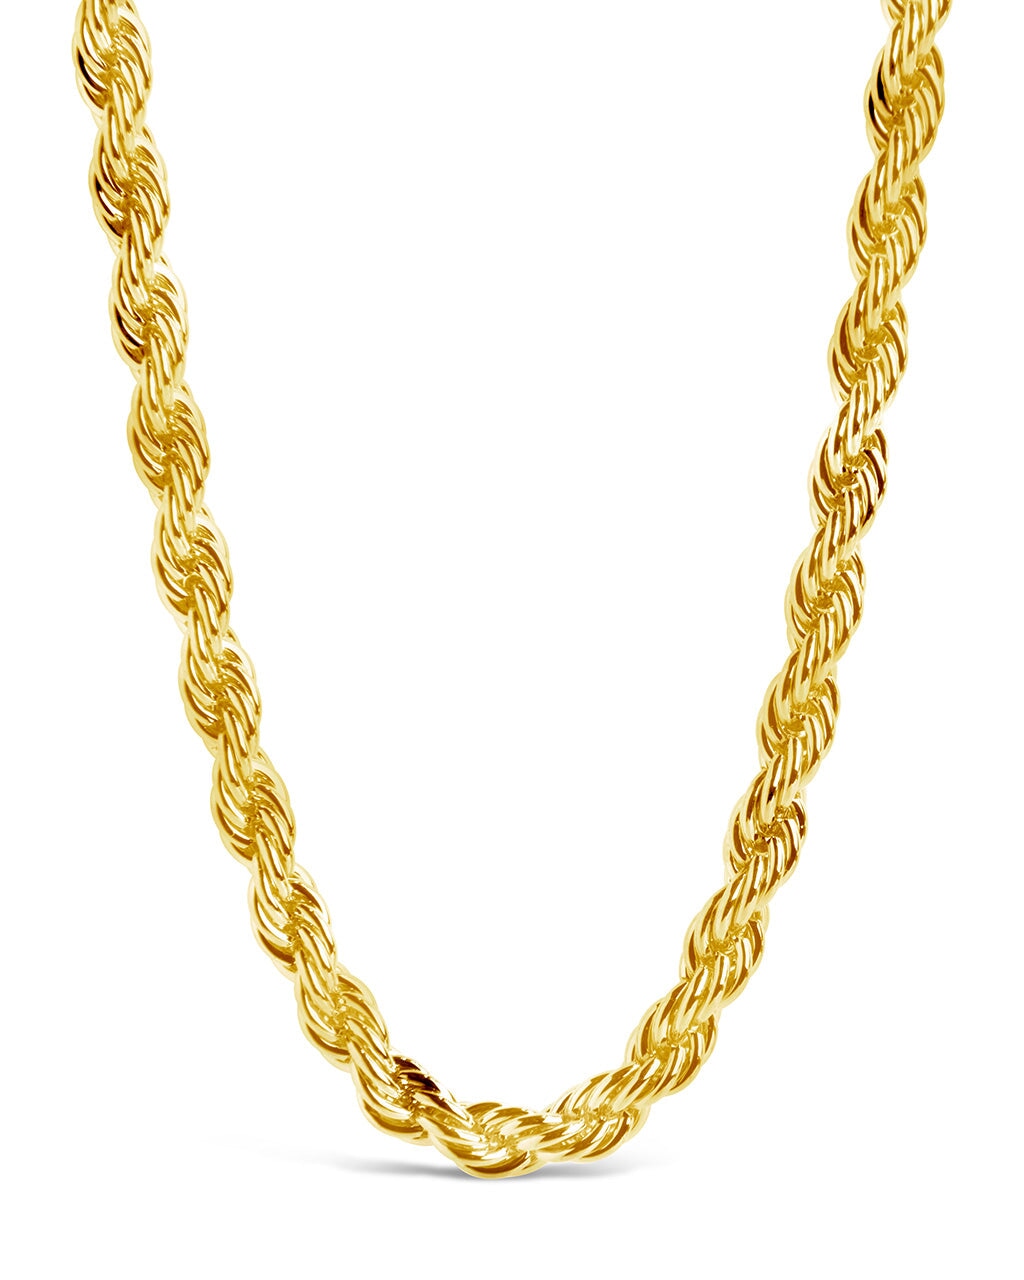 Sutton Chain Necklace Sterling Forever Gold 